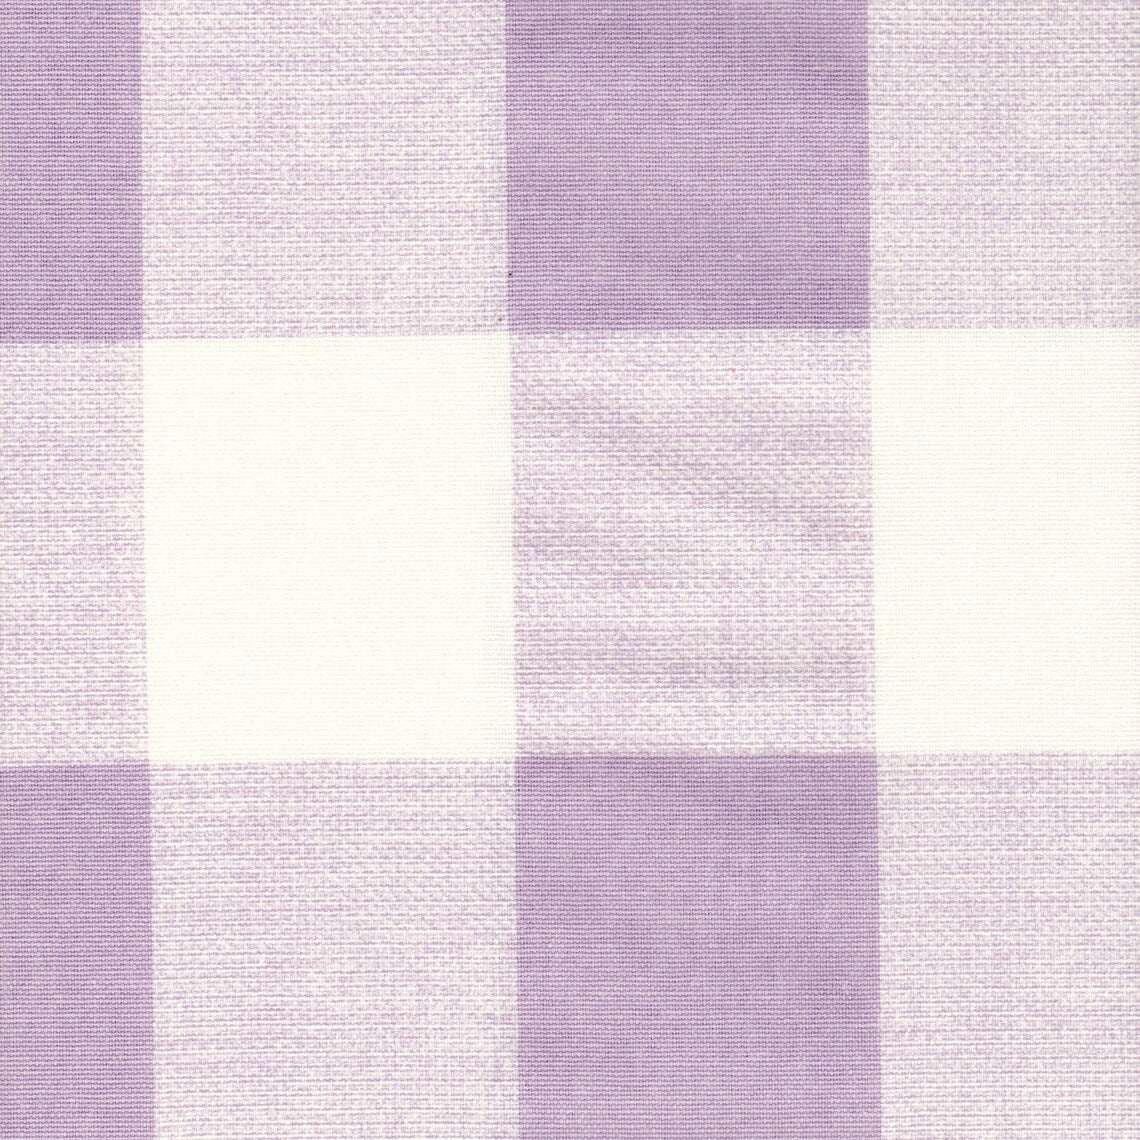 Pillow Sham in Anderson Orchid Lavender Buffalo Check Plaid